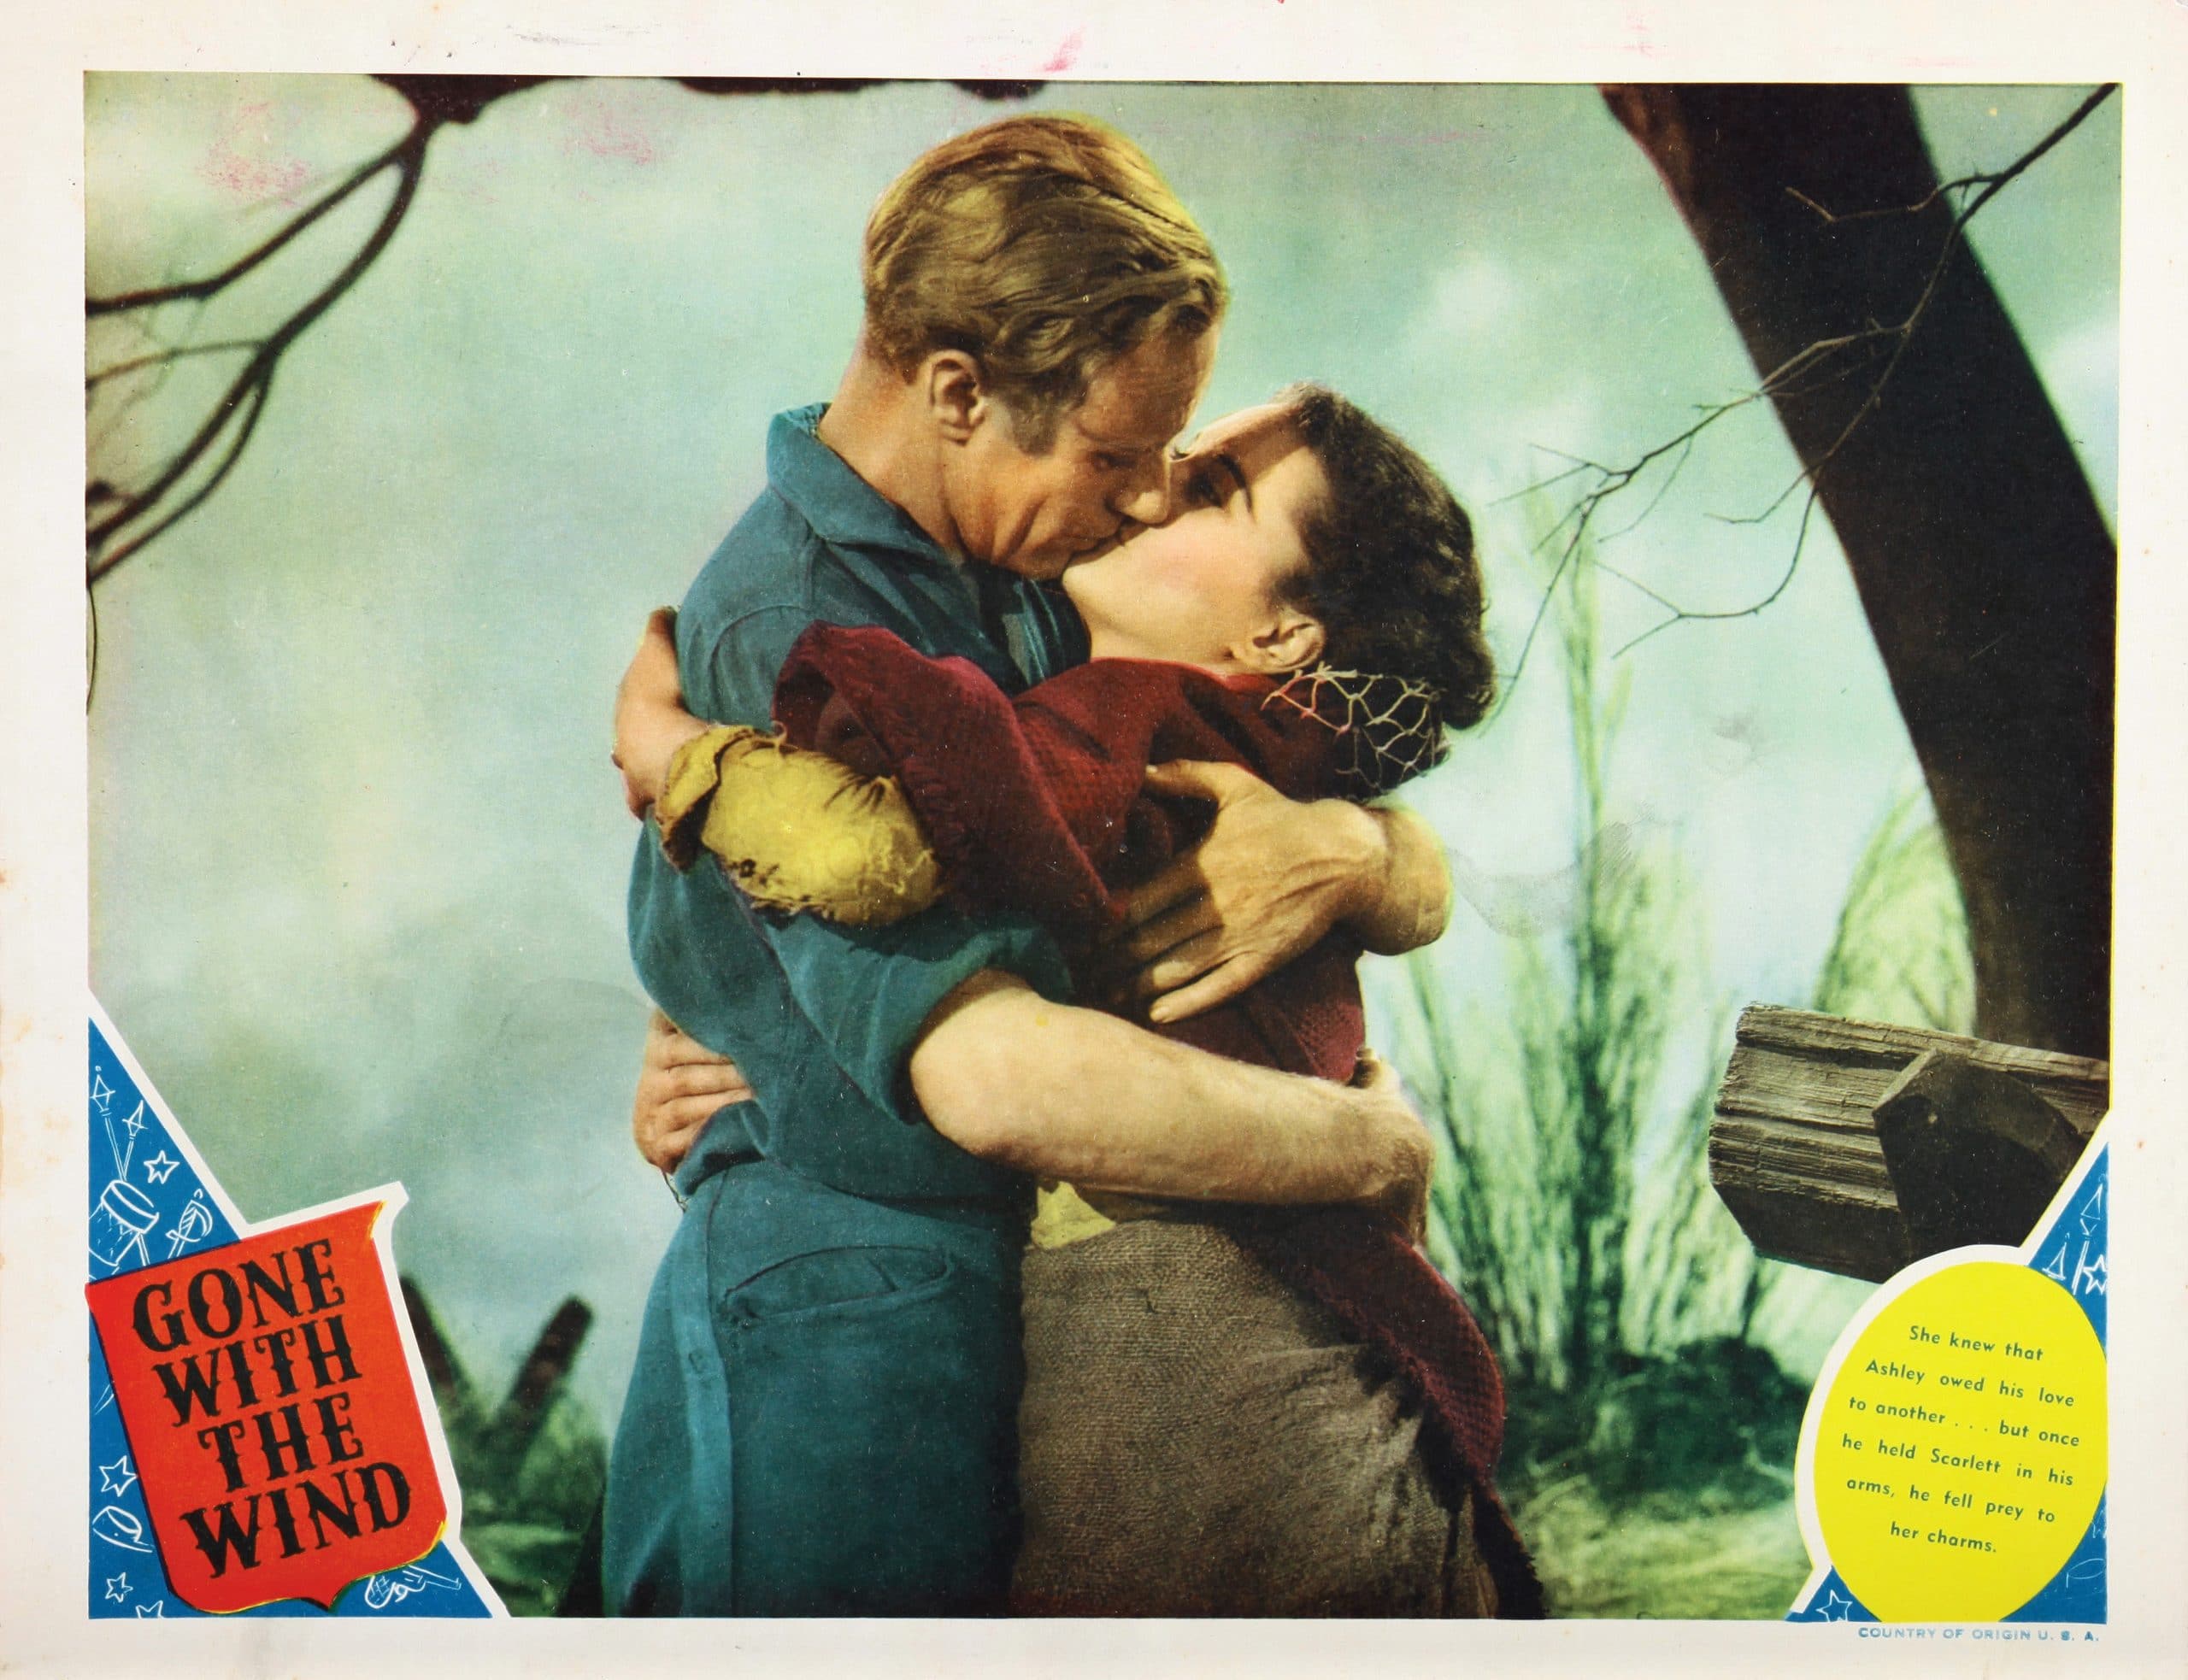 GONE WITH THE WIND, lobbycard, from left: Leslie Howard, Vivien Leigh, 1939 